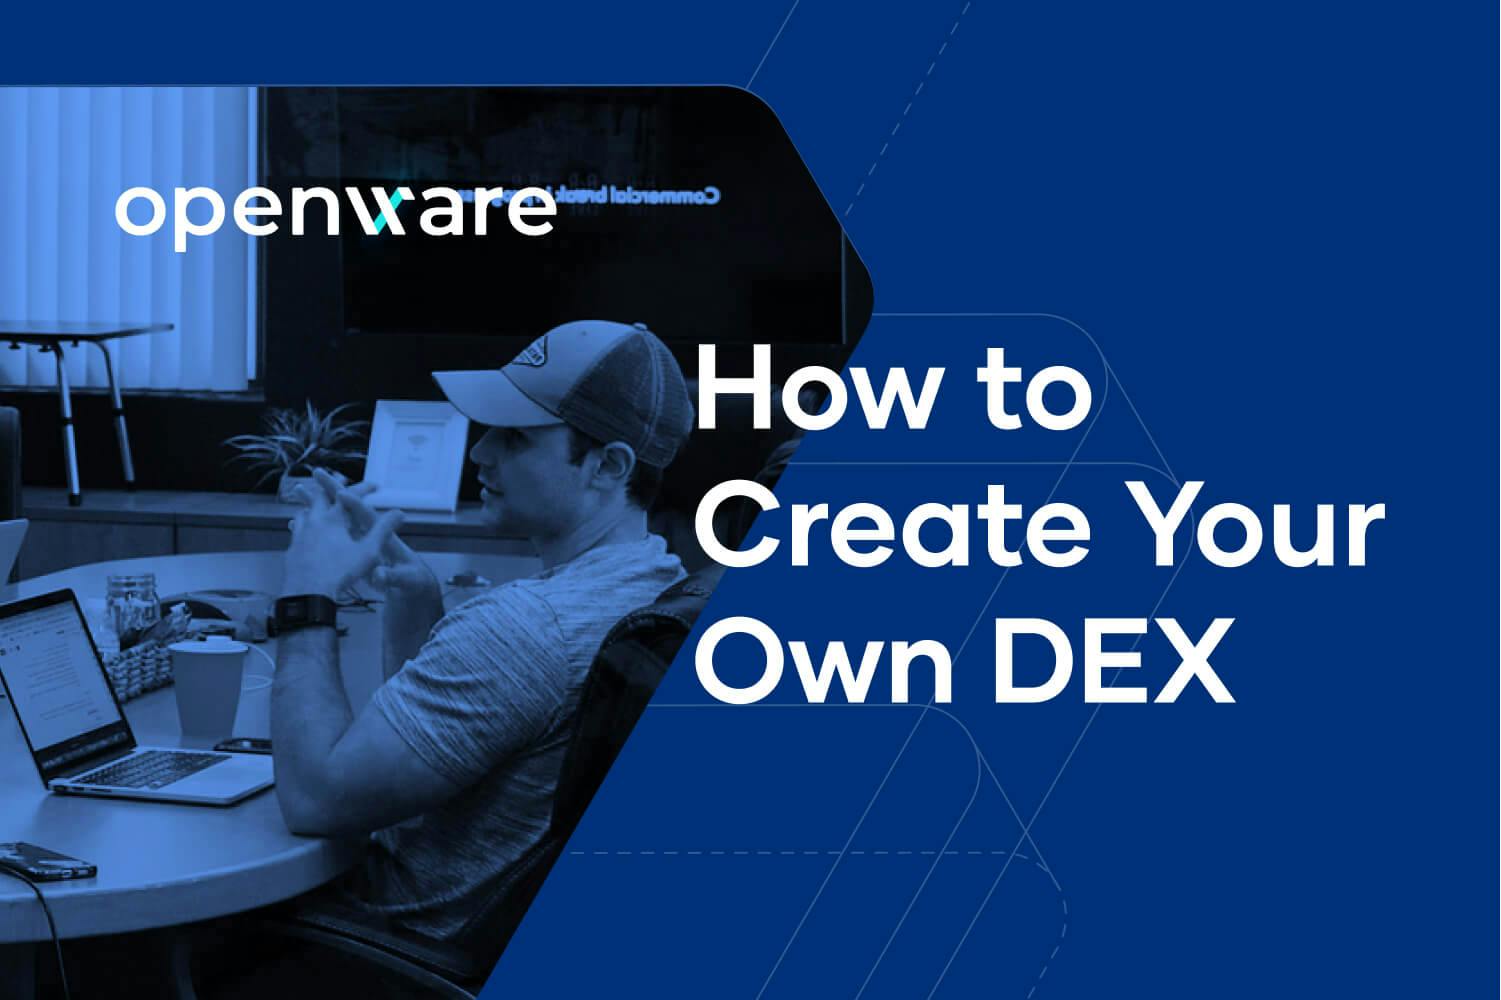 Blue tinted banner with the text "How to Create Your Own DEX" shown in white